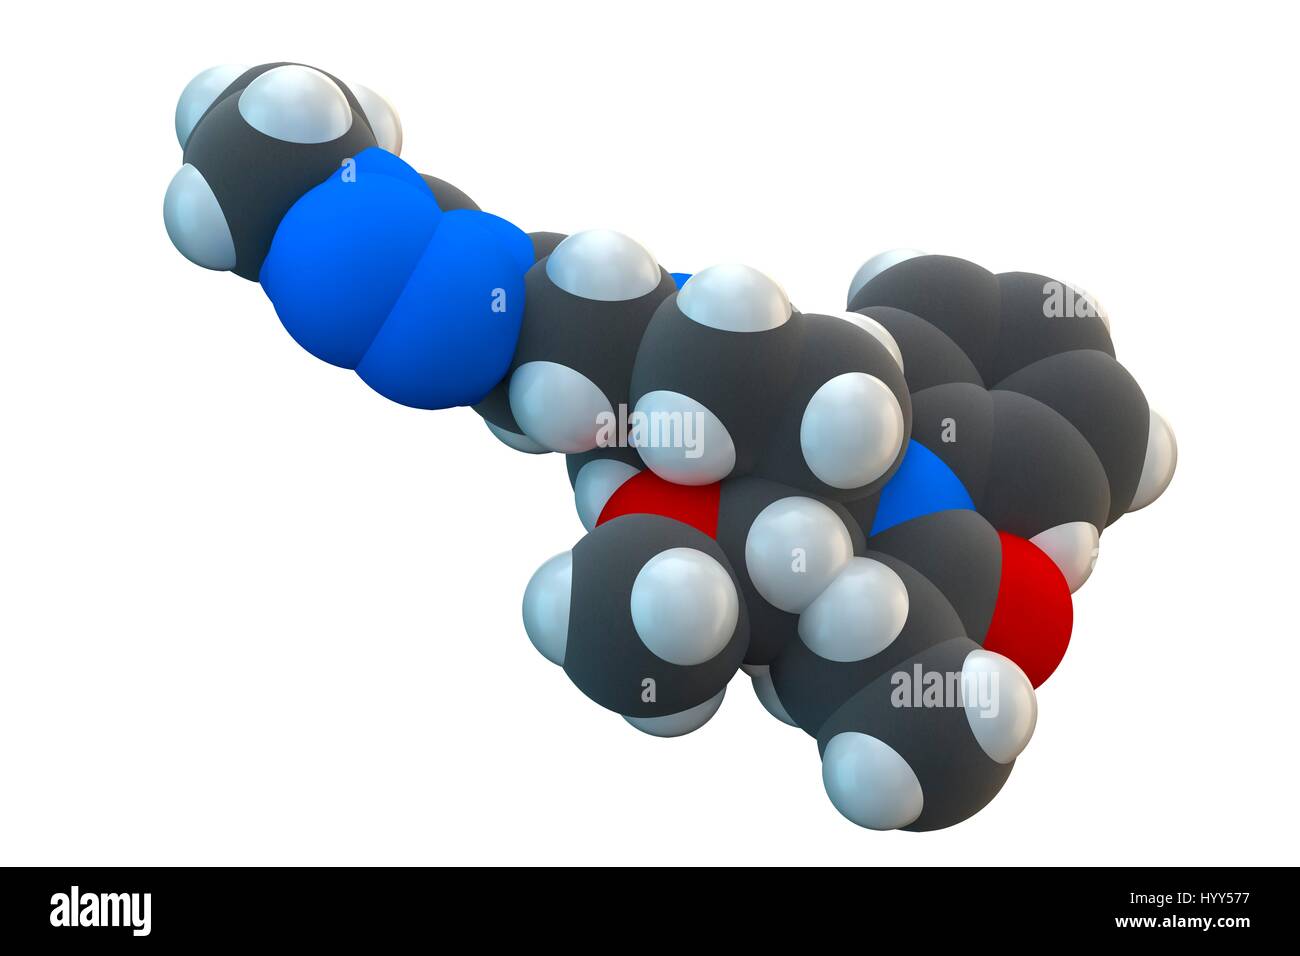 Alfentanil, molecular model. Synthetic opioid analgesic drug used for anaesthesia in surgery. Chemical formula is C21H32N6O3. Atoms are represented as spheres: carbon (grey), hydrogen (white), nitrogen (blue), oxygen (red). Illustration. Stock Photo